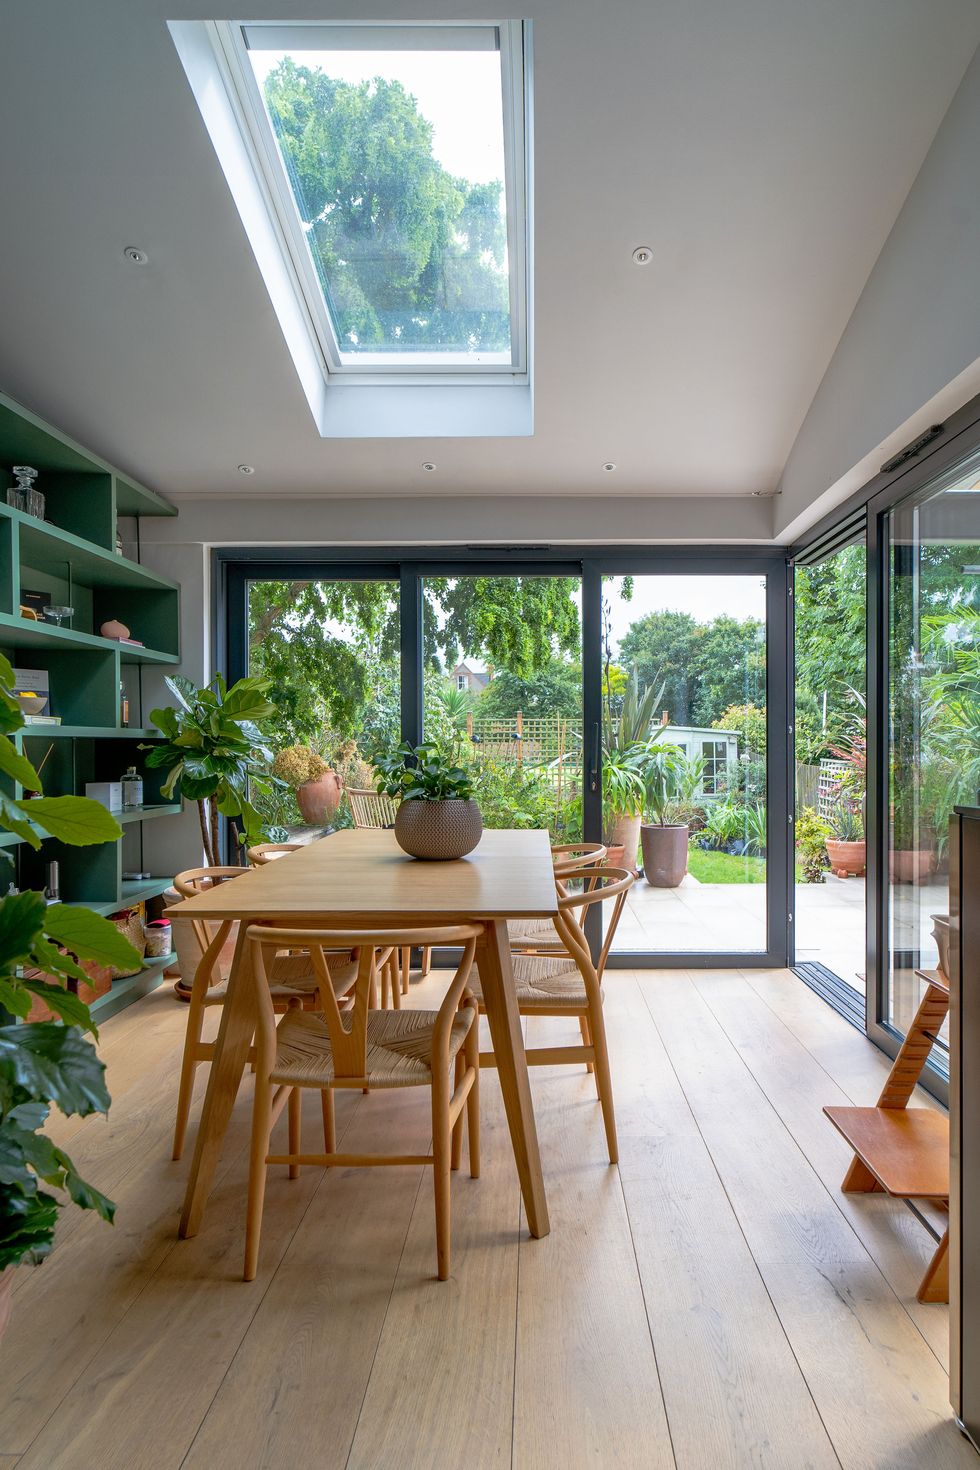 house renovation in ealing, west london by architecture and design studio red deer